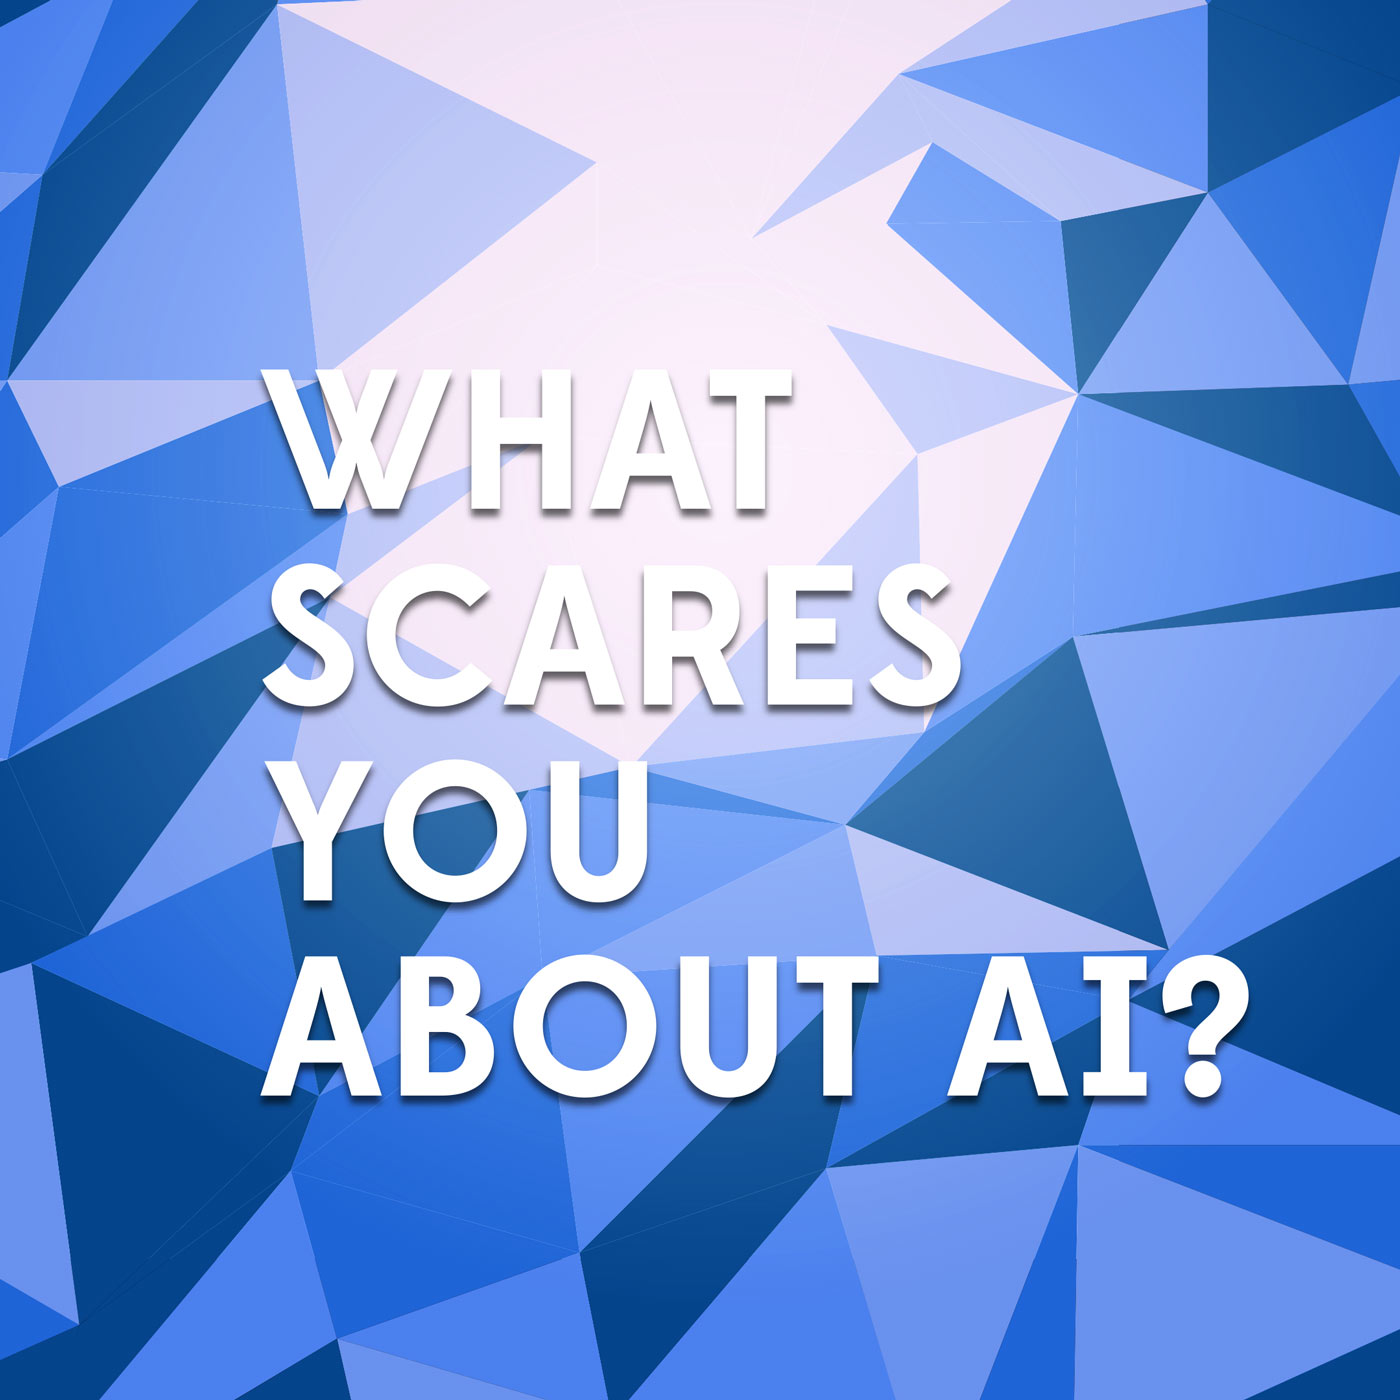 What scares you about AI?